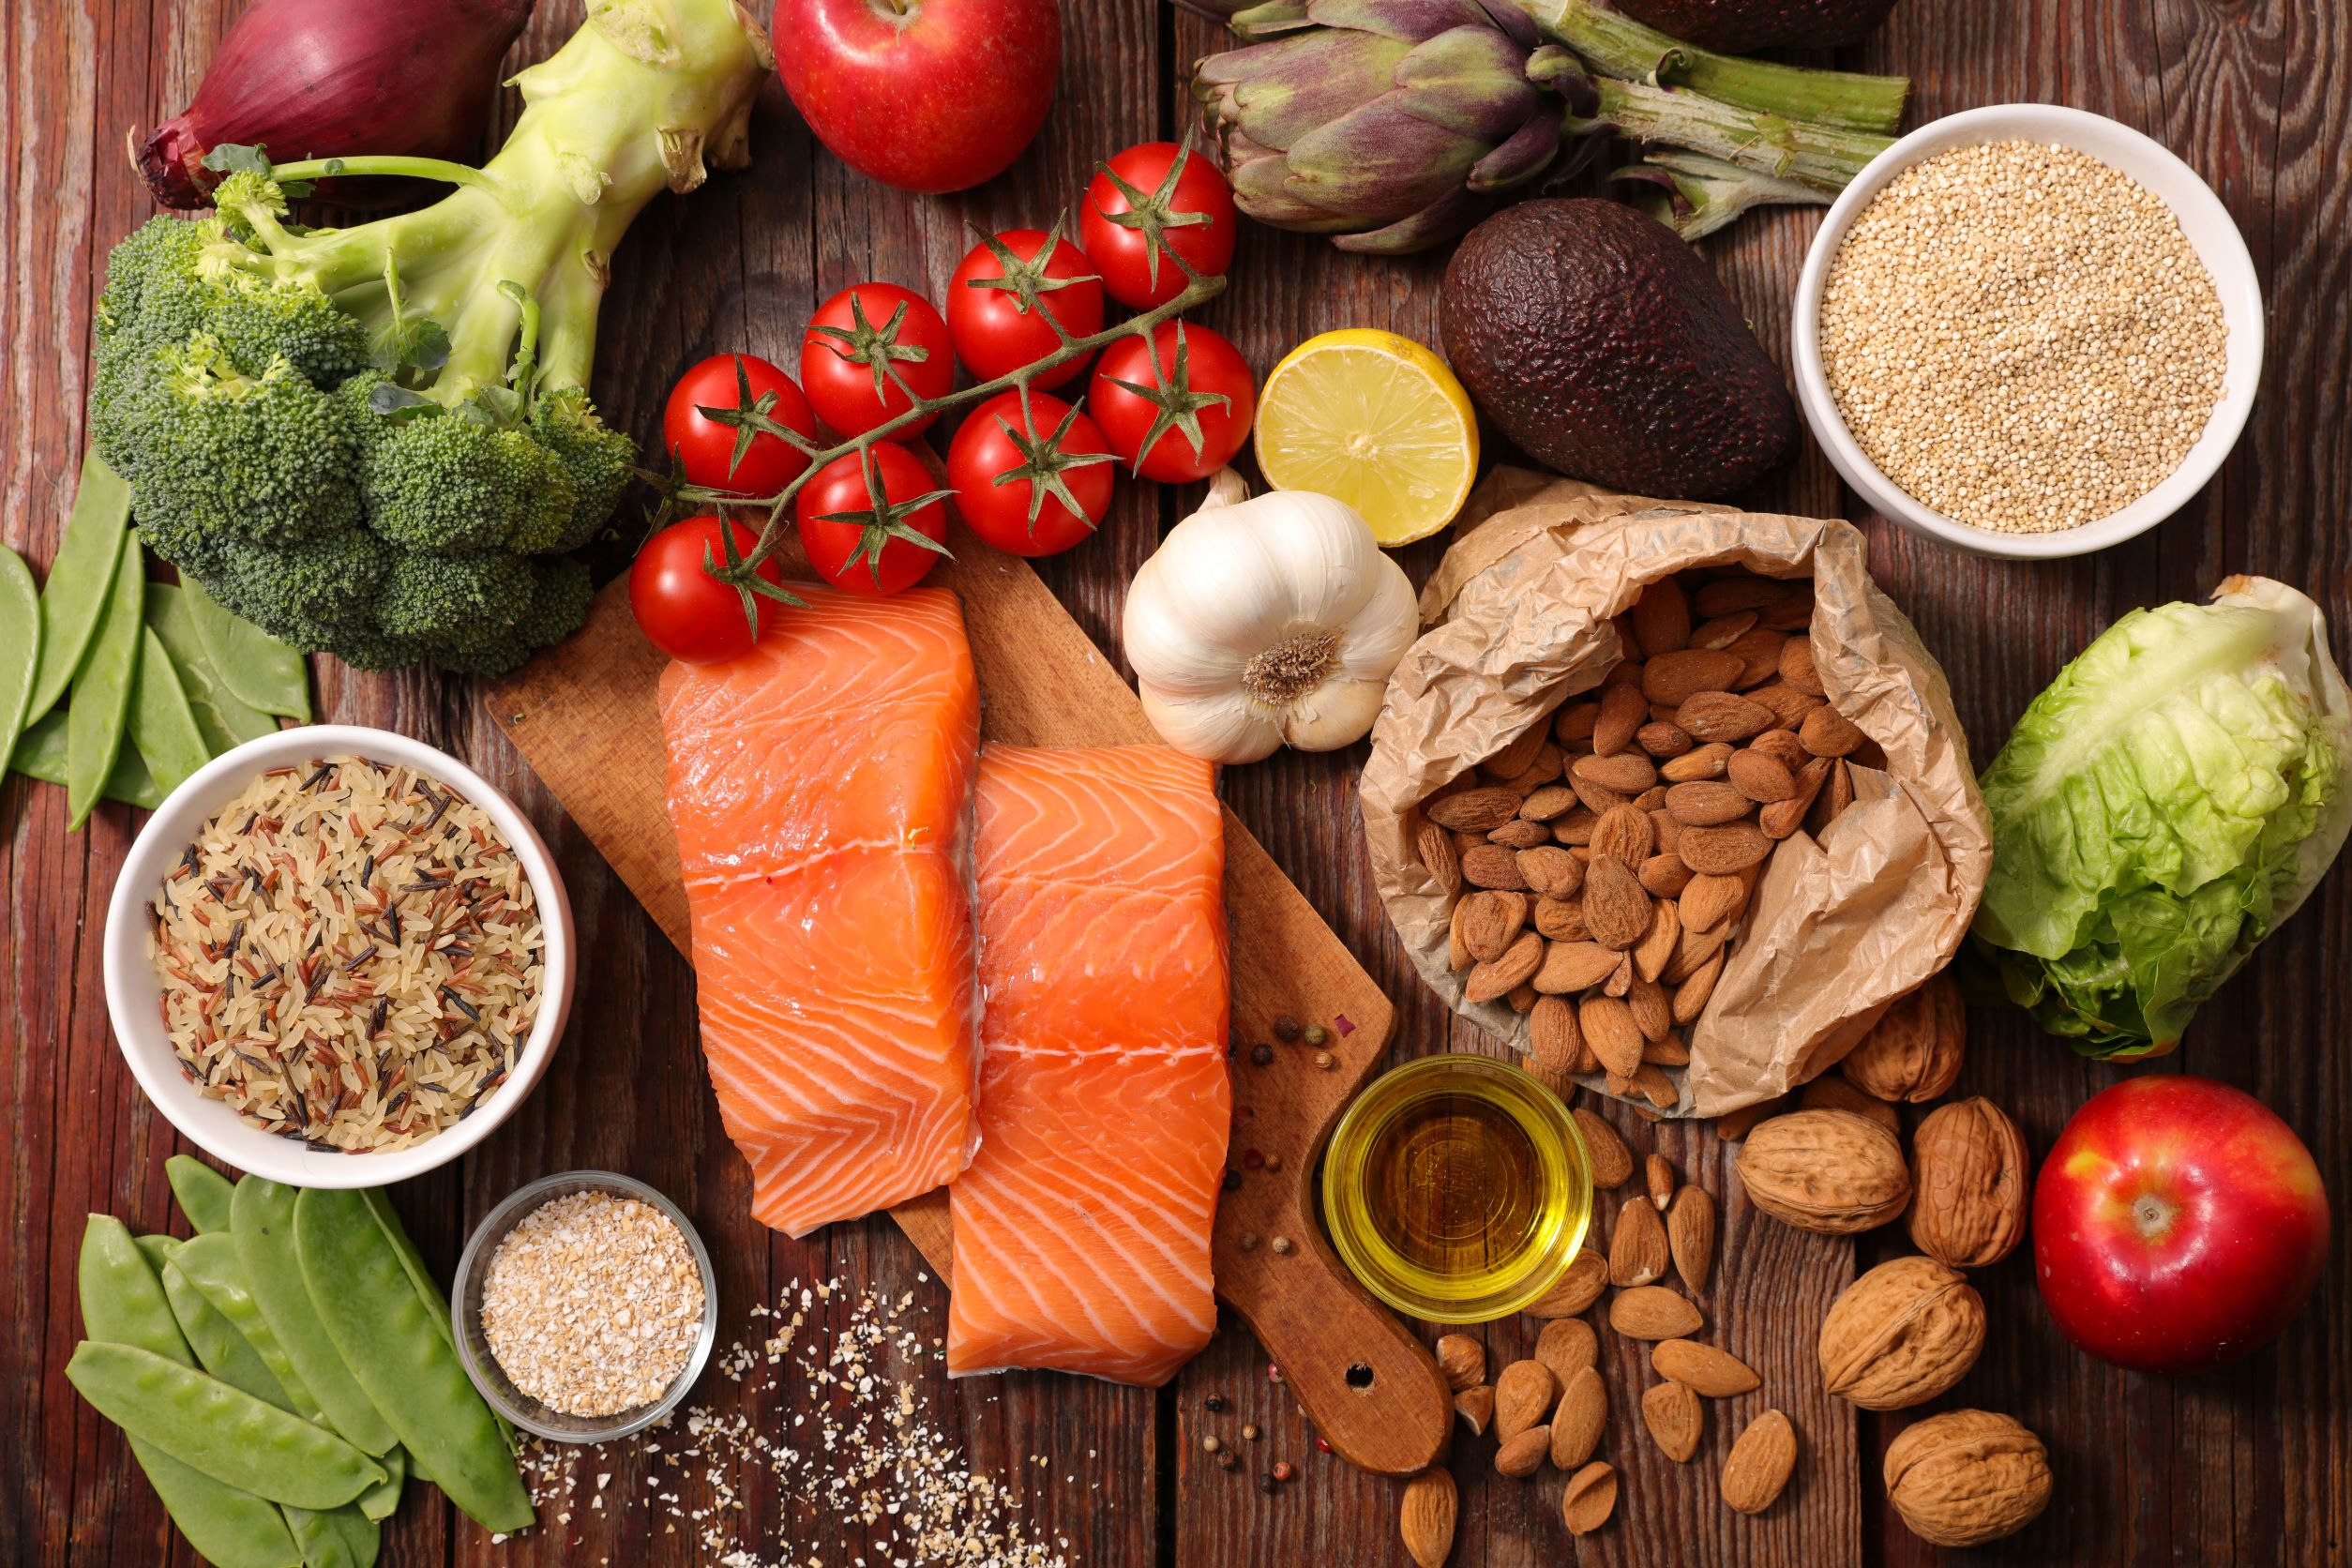 Food for a healthy diet: vegetables, fish, nuts